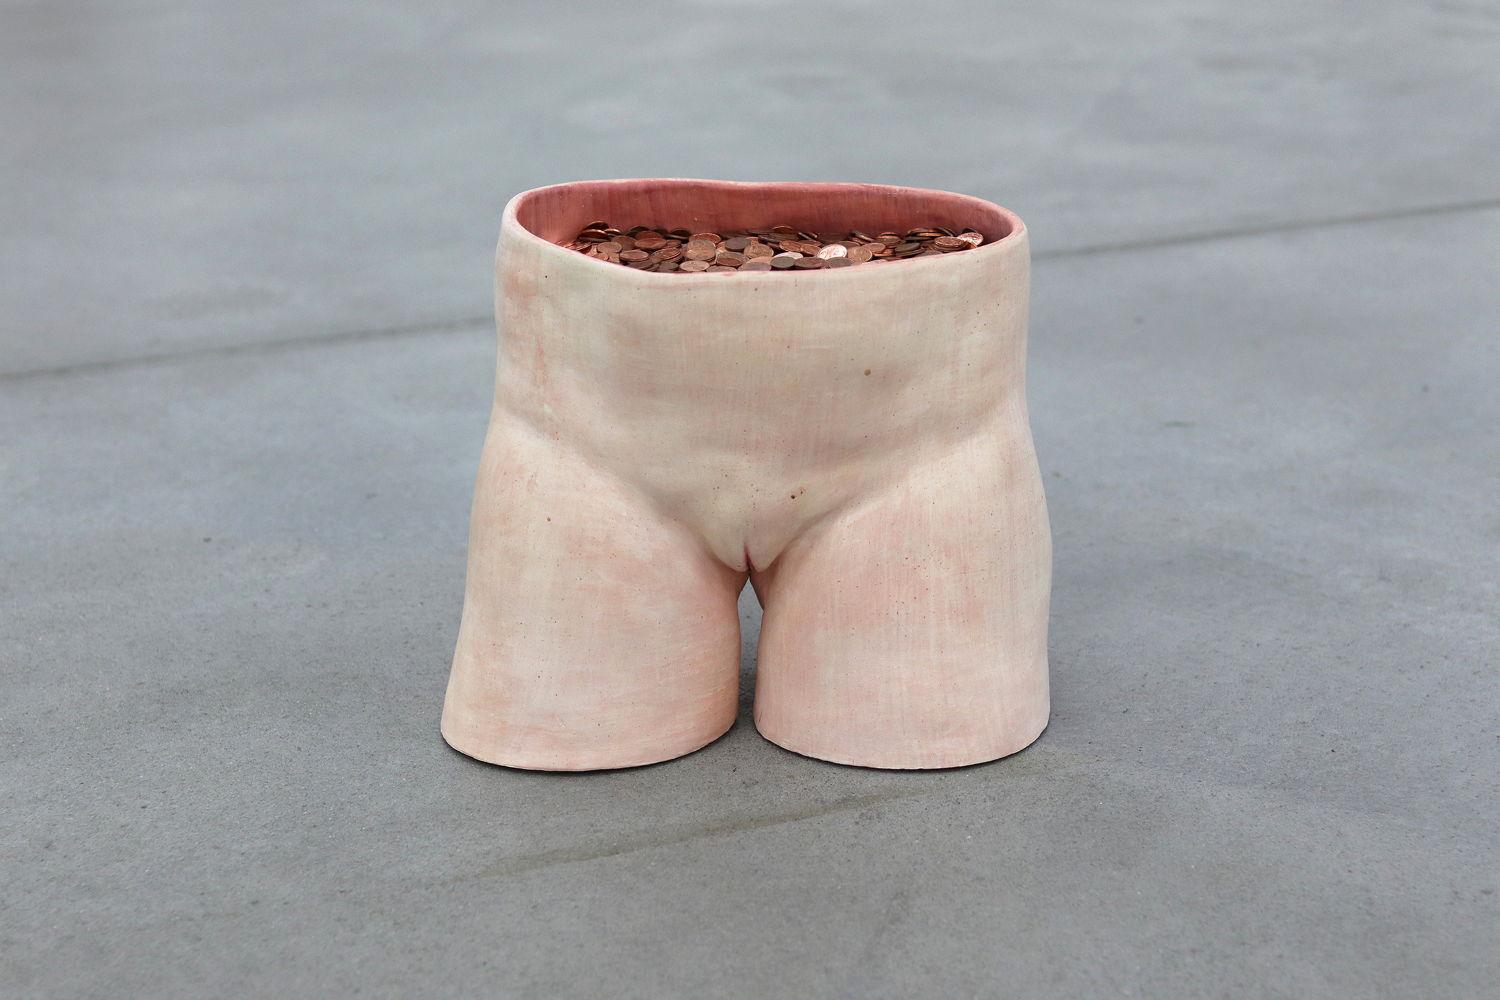 Aline Bouvy, Primitive Accumulation, 2019. Watercolour on fired clay, 1 eurocent coins. Photo: Luise von Nobbe